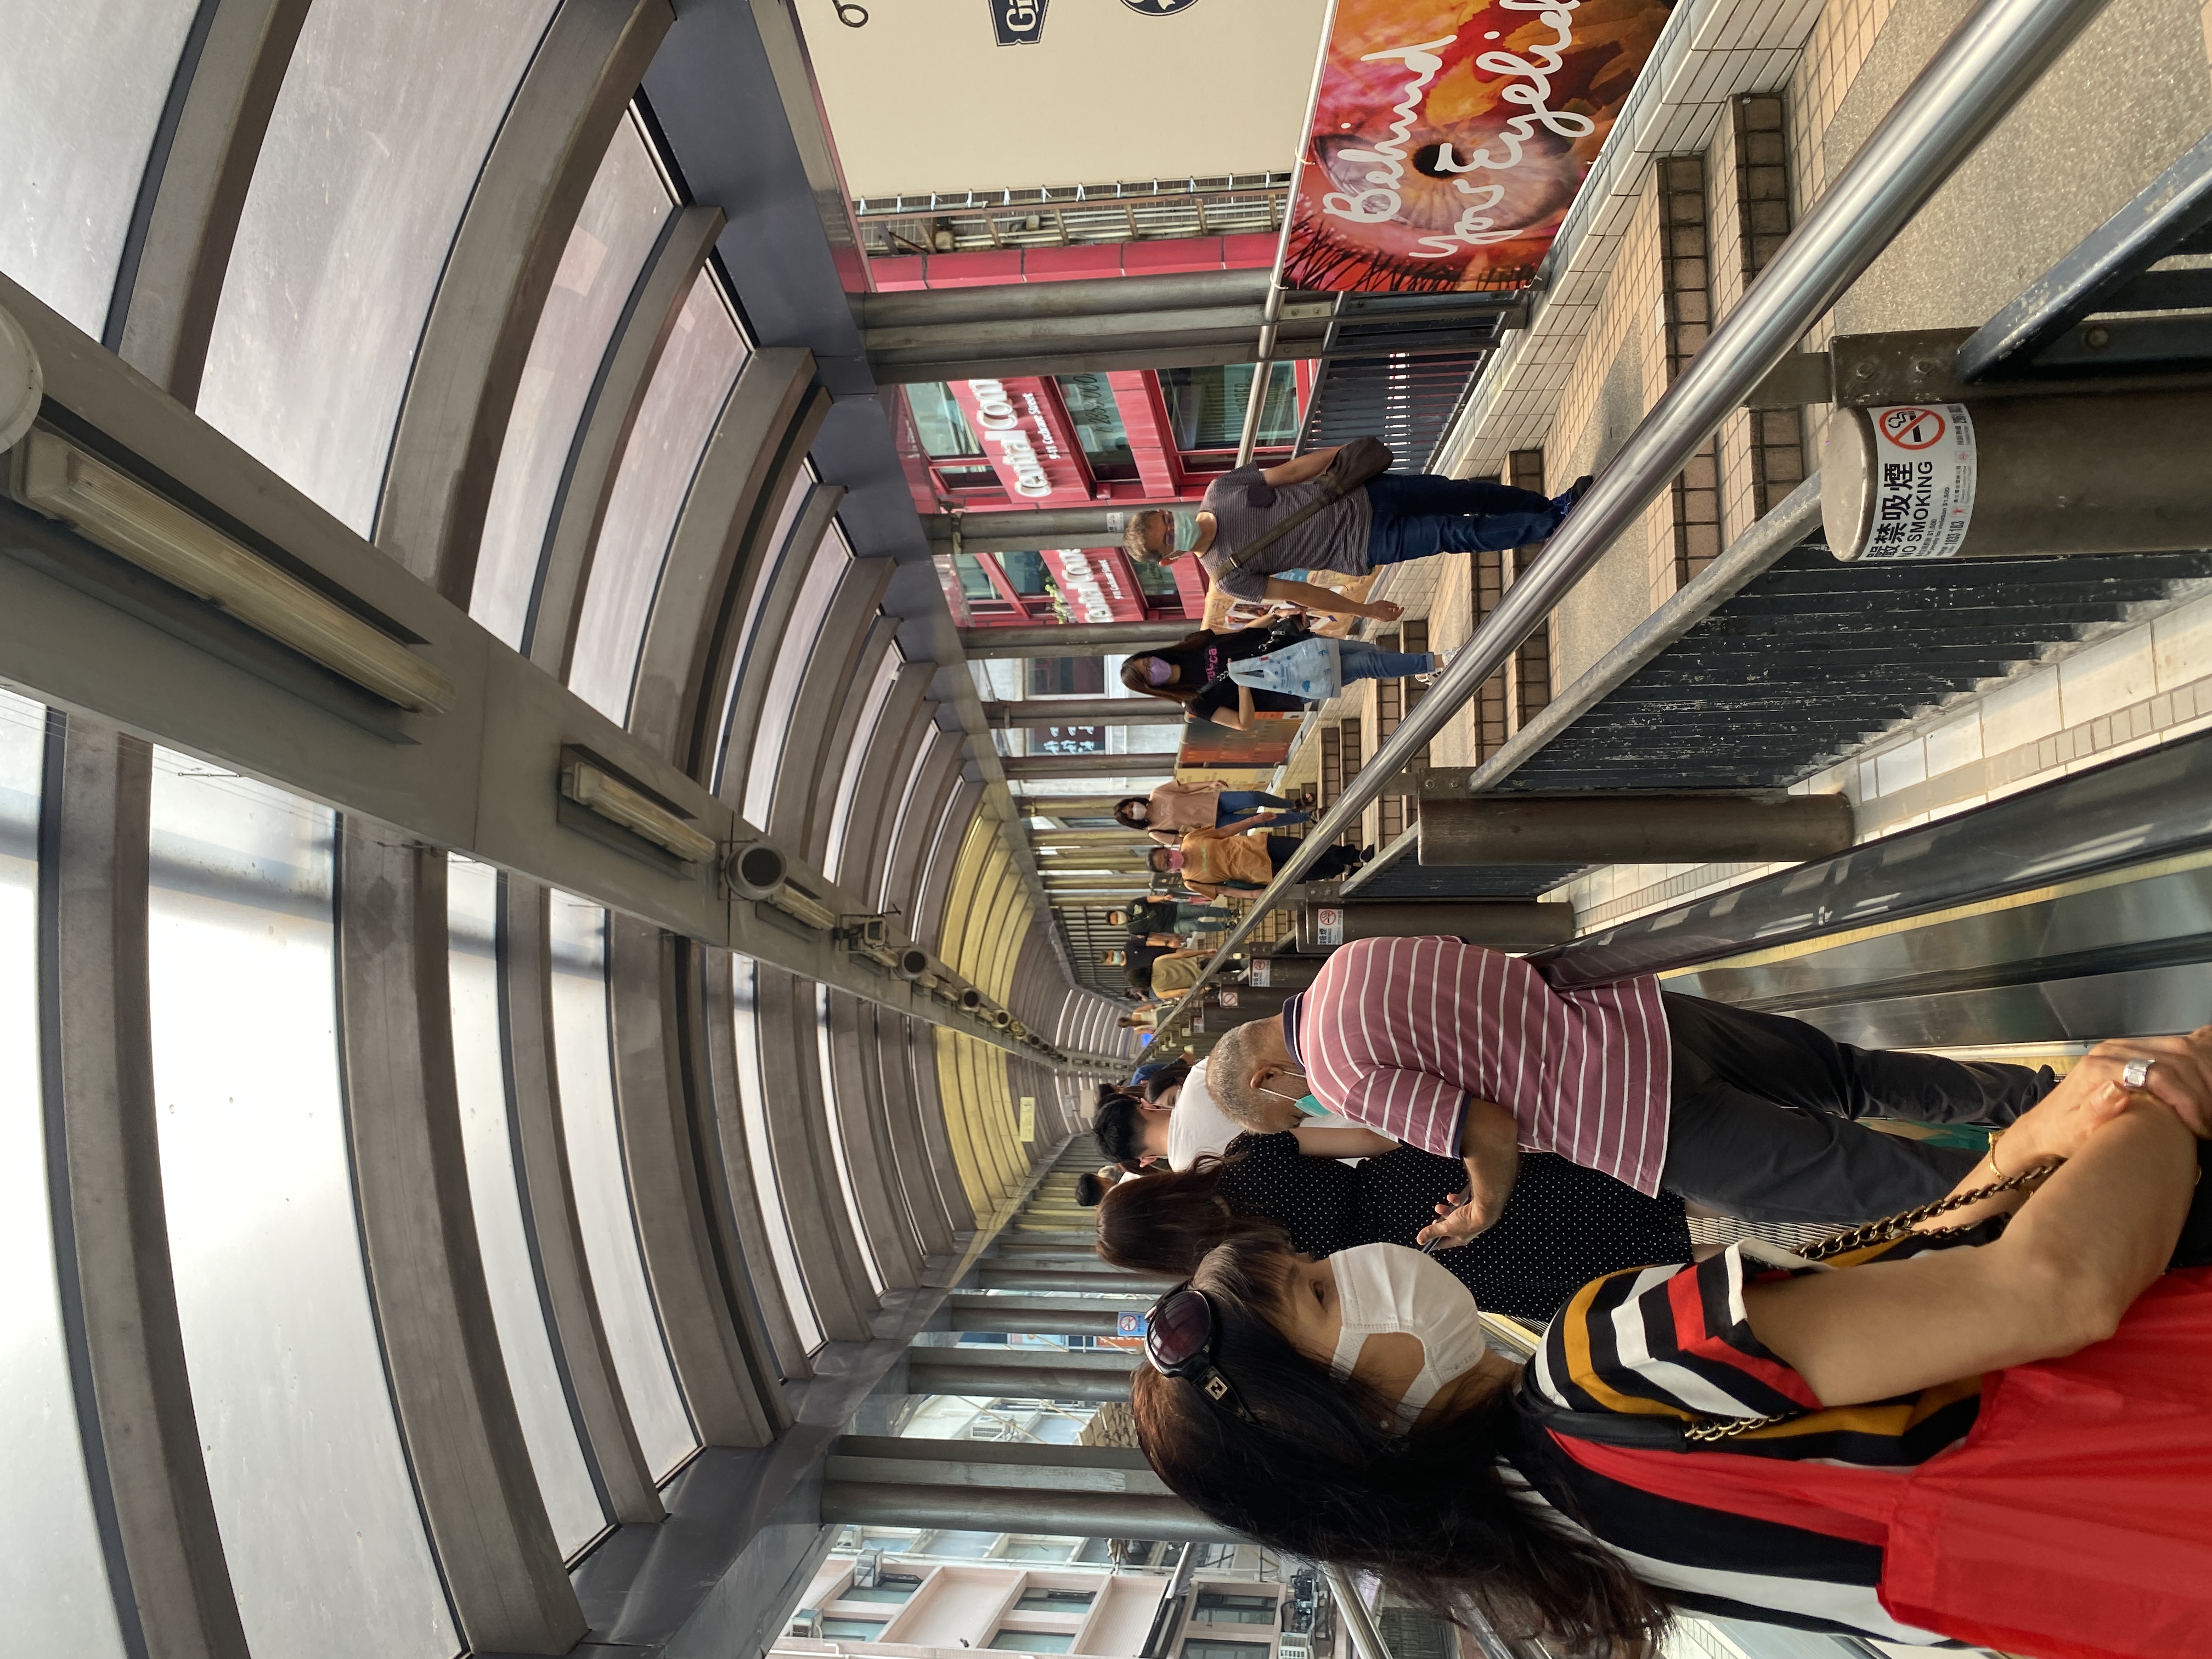 The longest outdoor escalator is located at mid levels